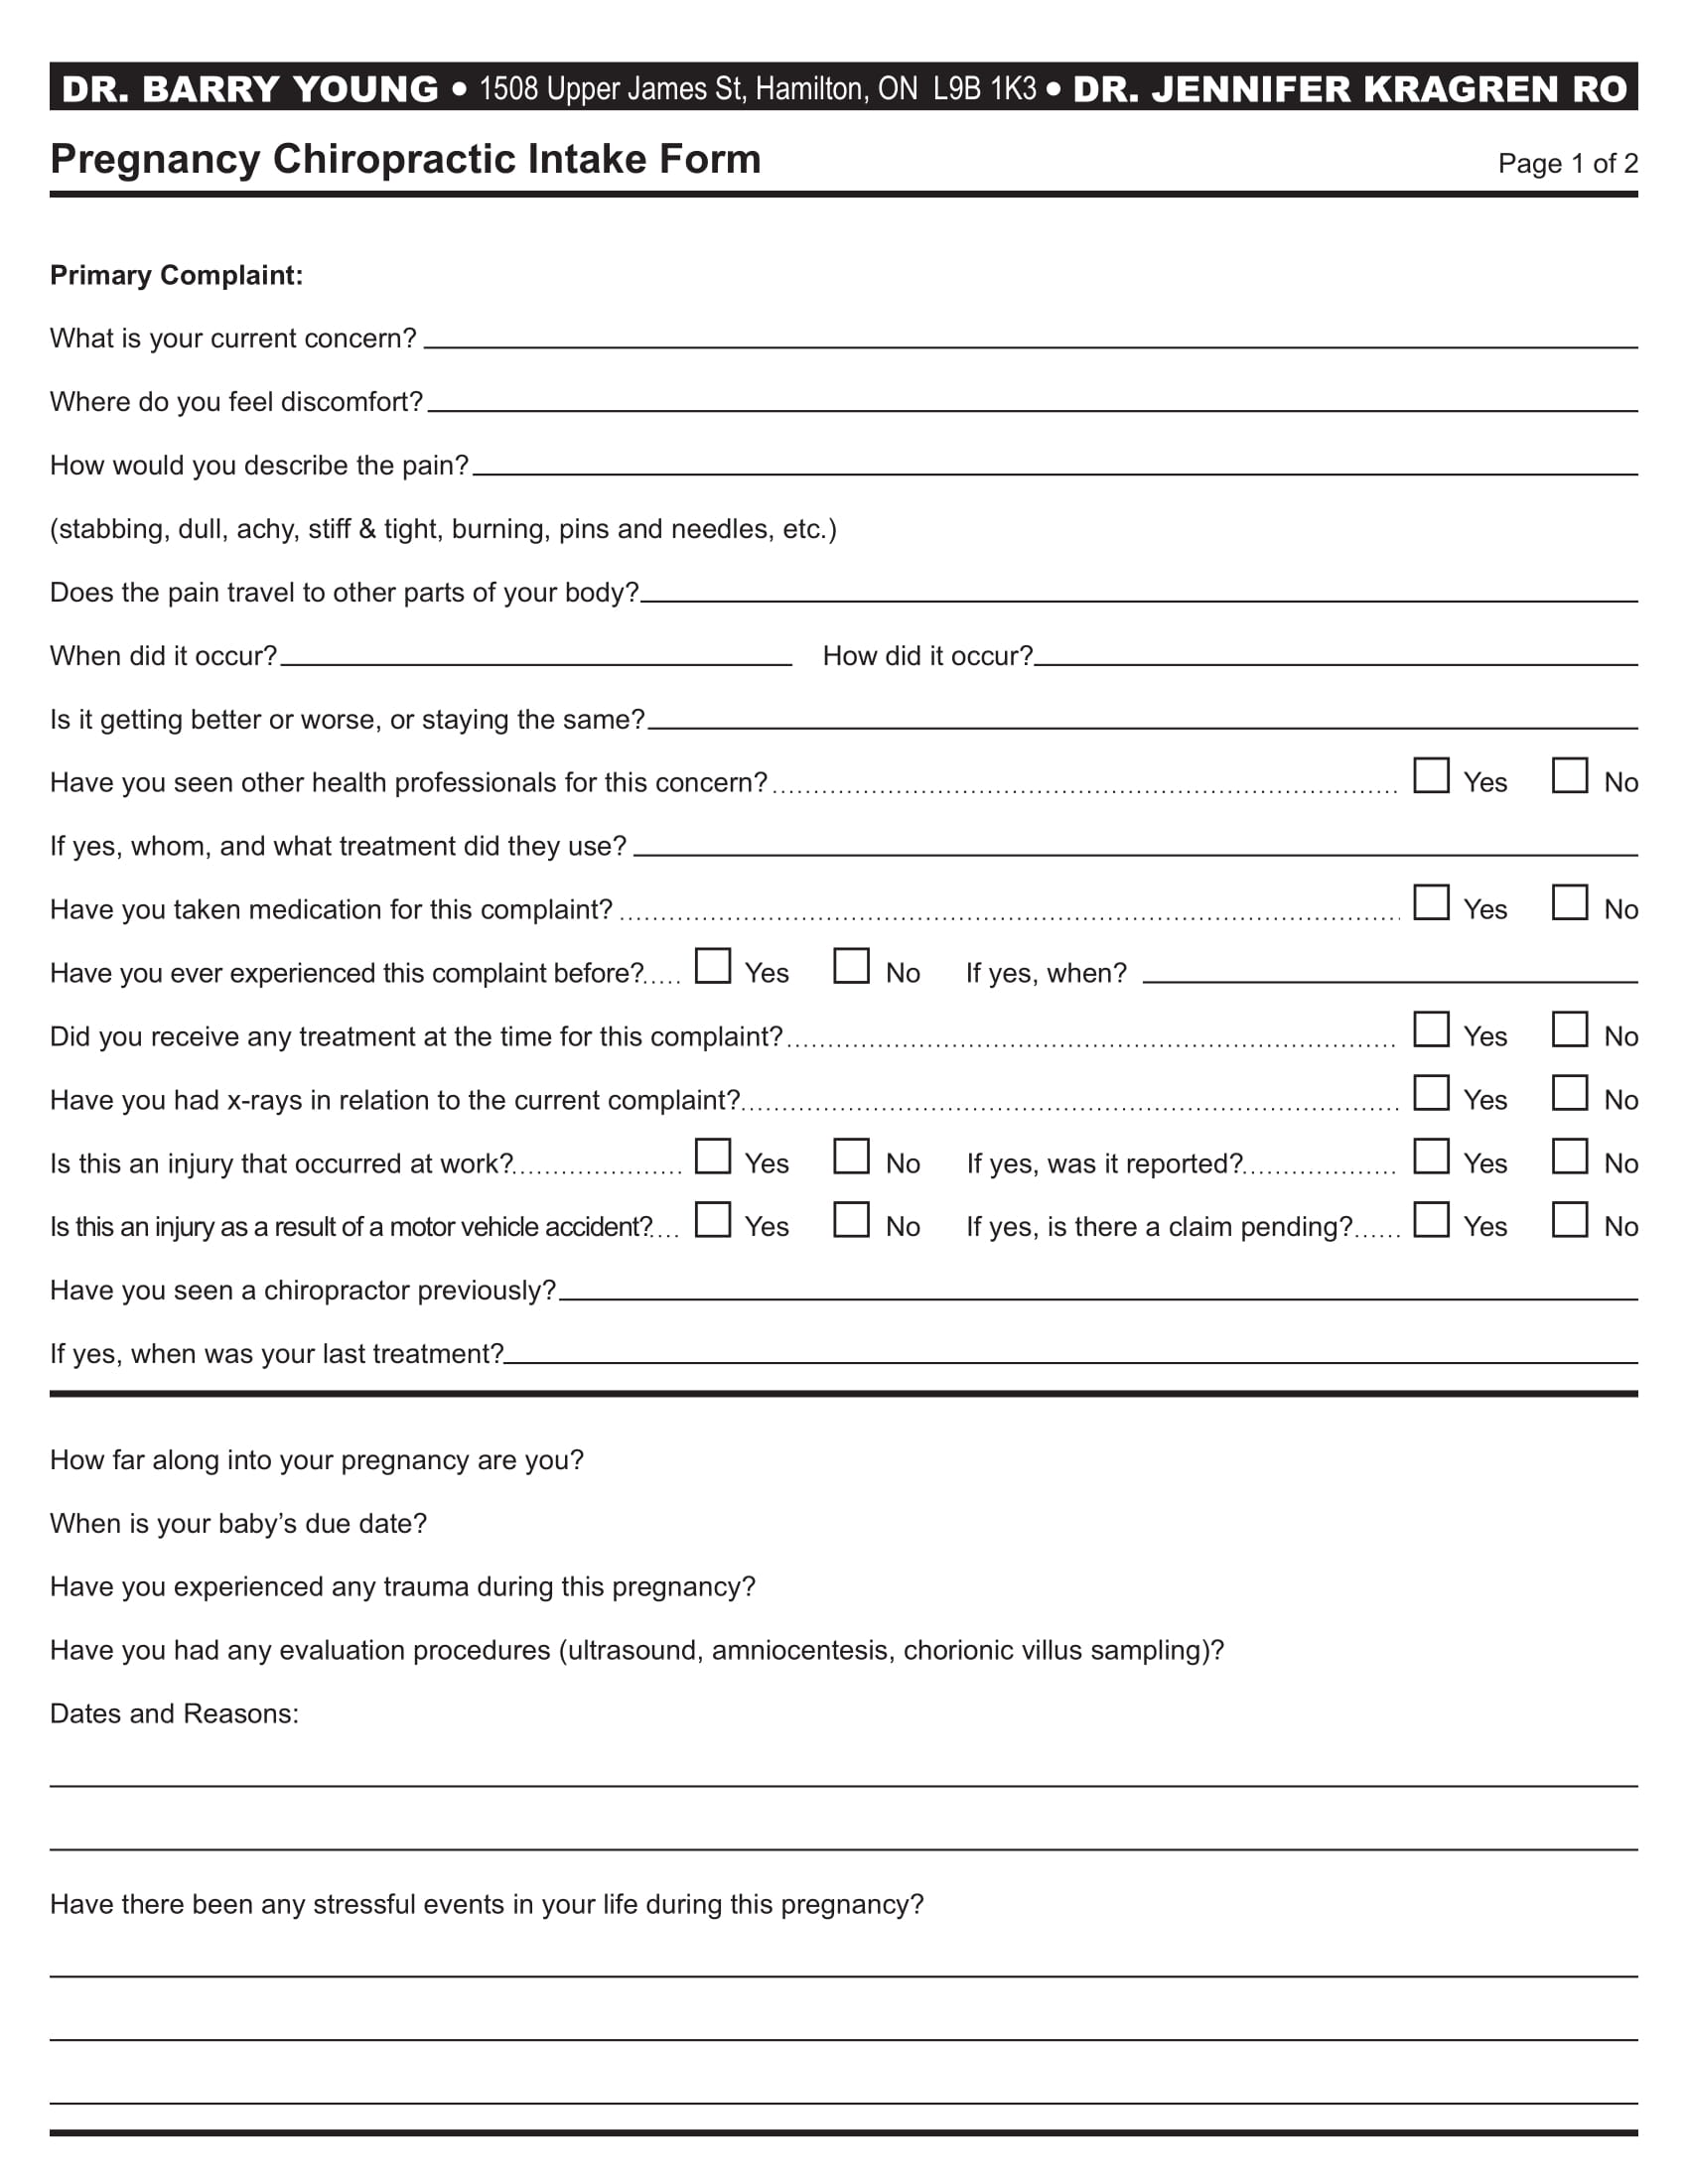 pregnancy chiropractic intake form 1